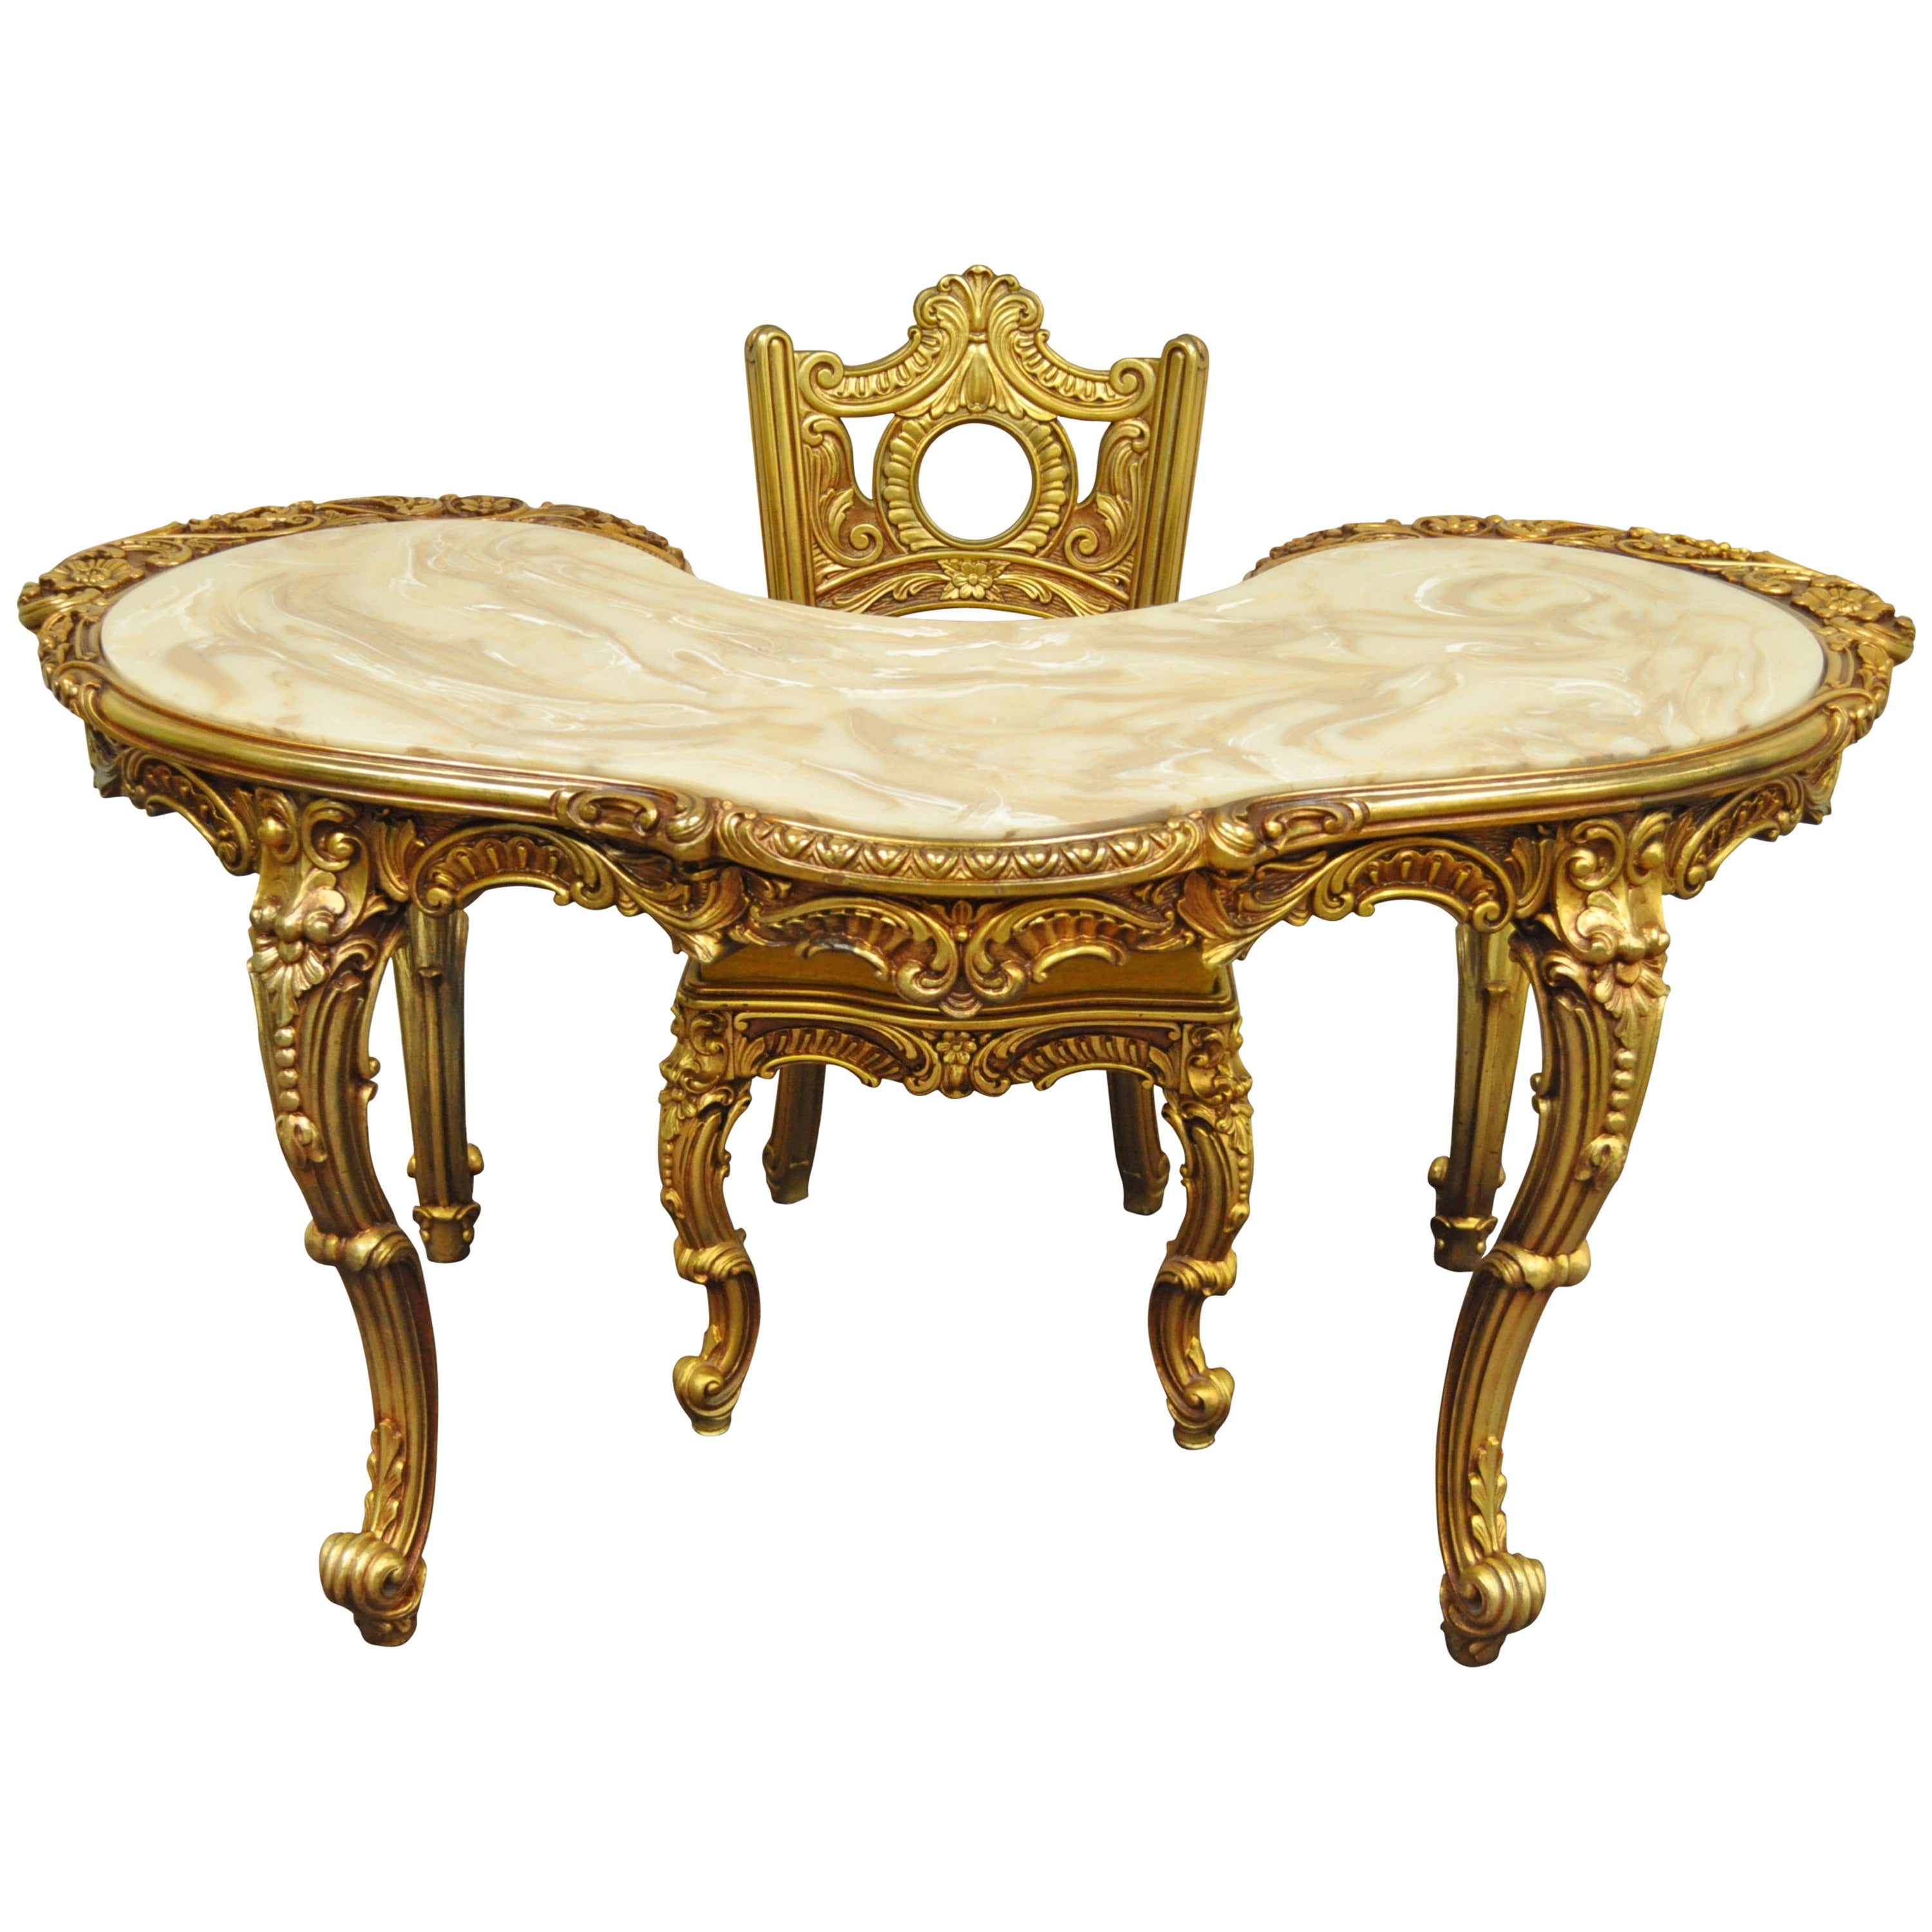 French Baroque Style Gold Gilt Kidney Vanity Desk & Chair attr. to Roma Furn.